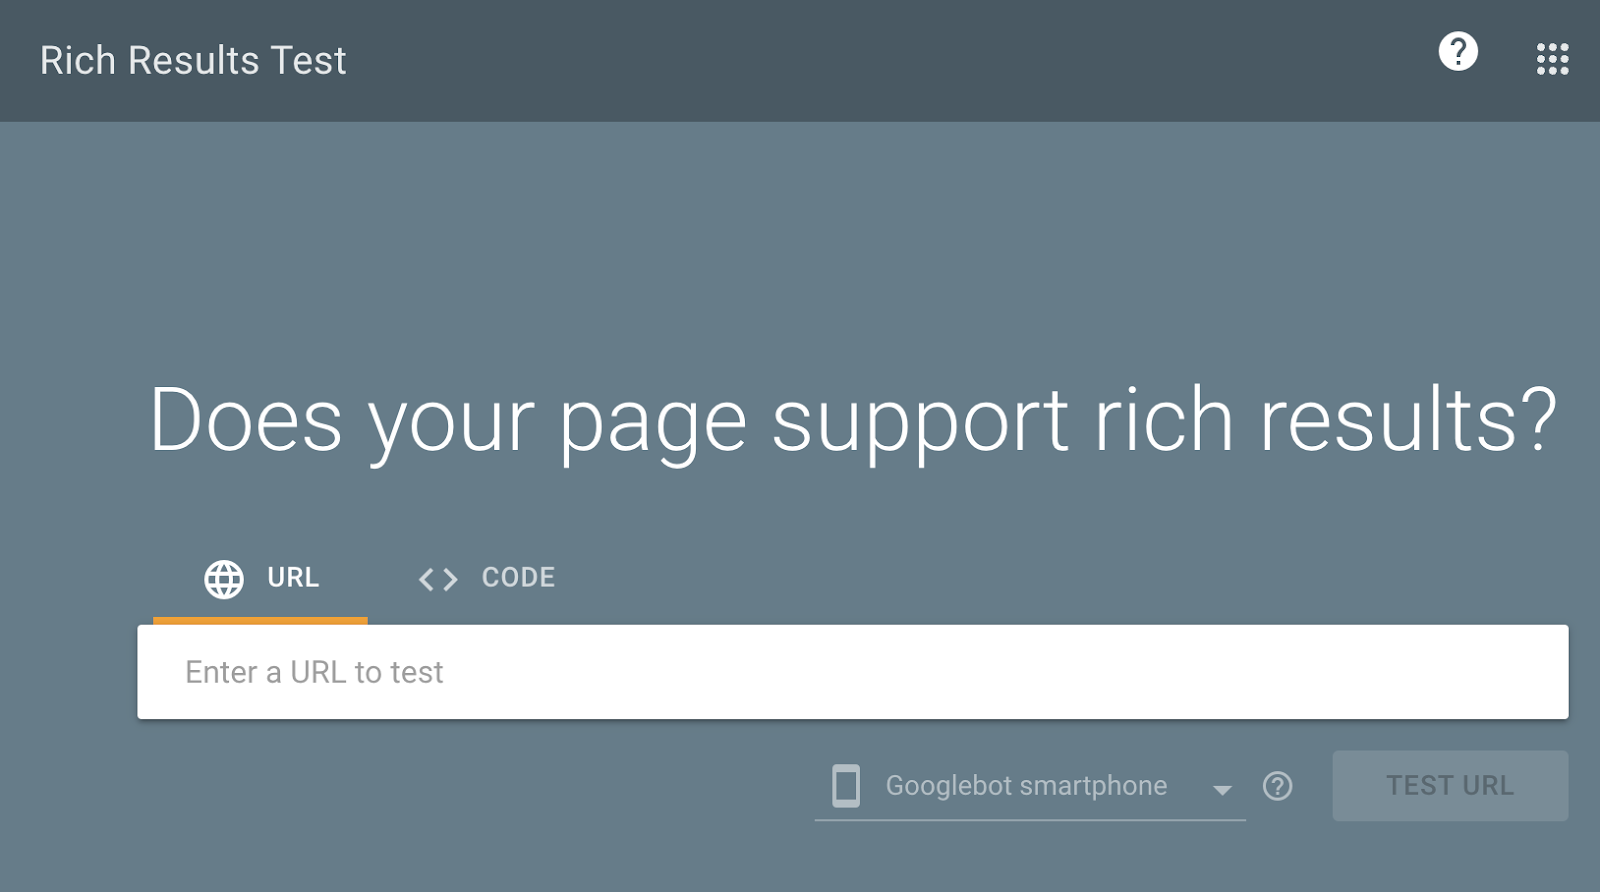 Google’s Rich Results Test tool